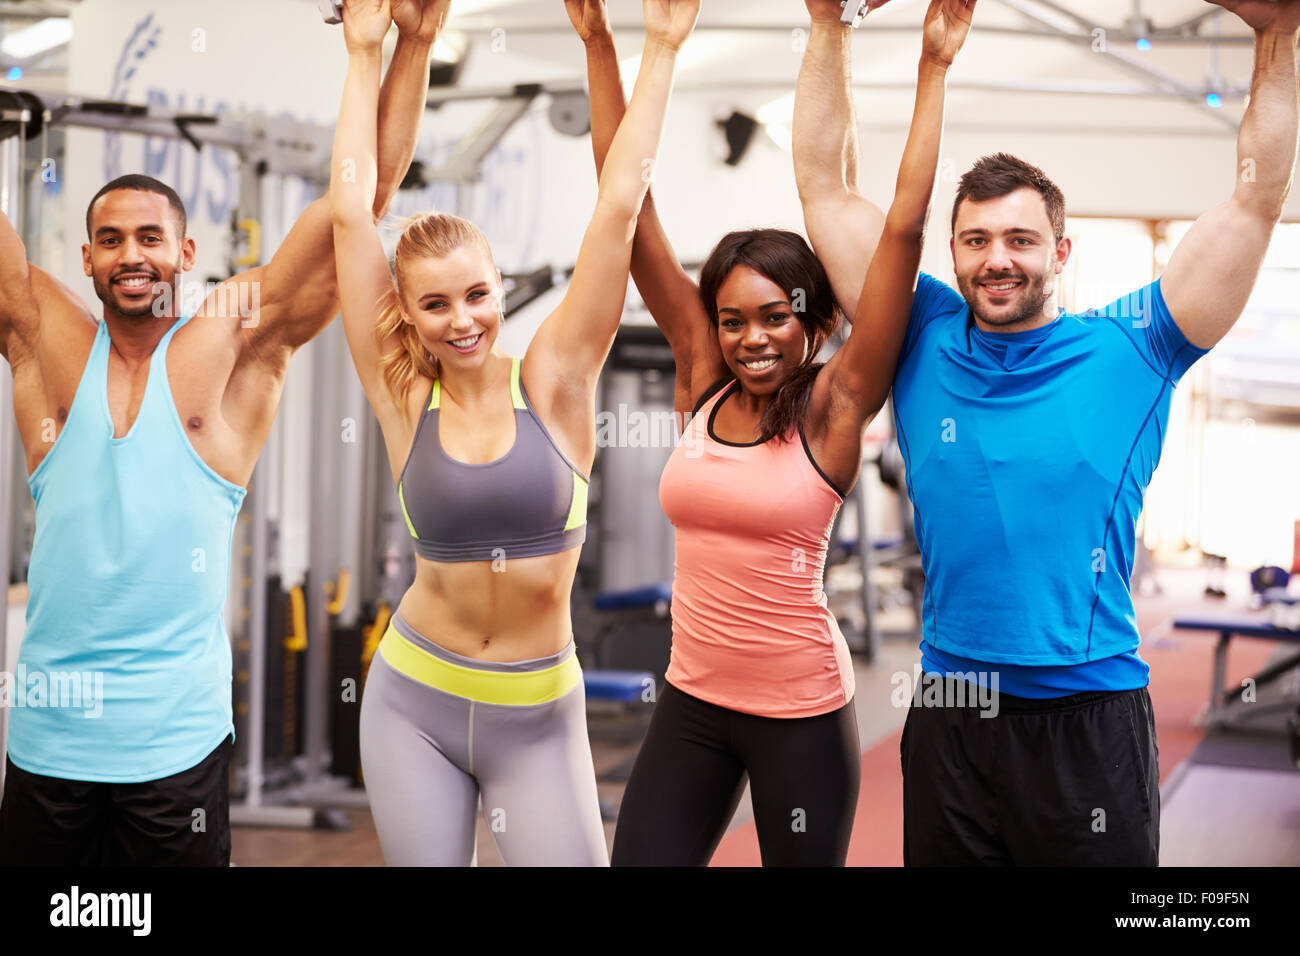 Happy, healthy group of people with arms in the air at a gym Stock Photo